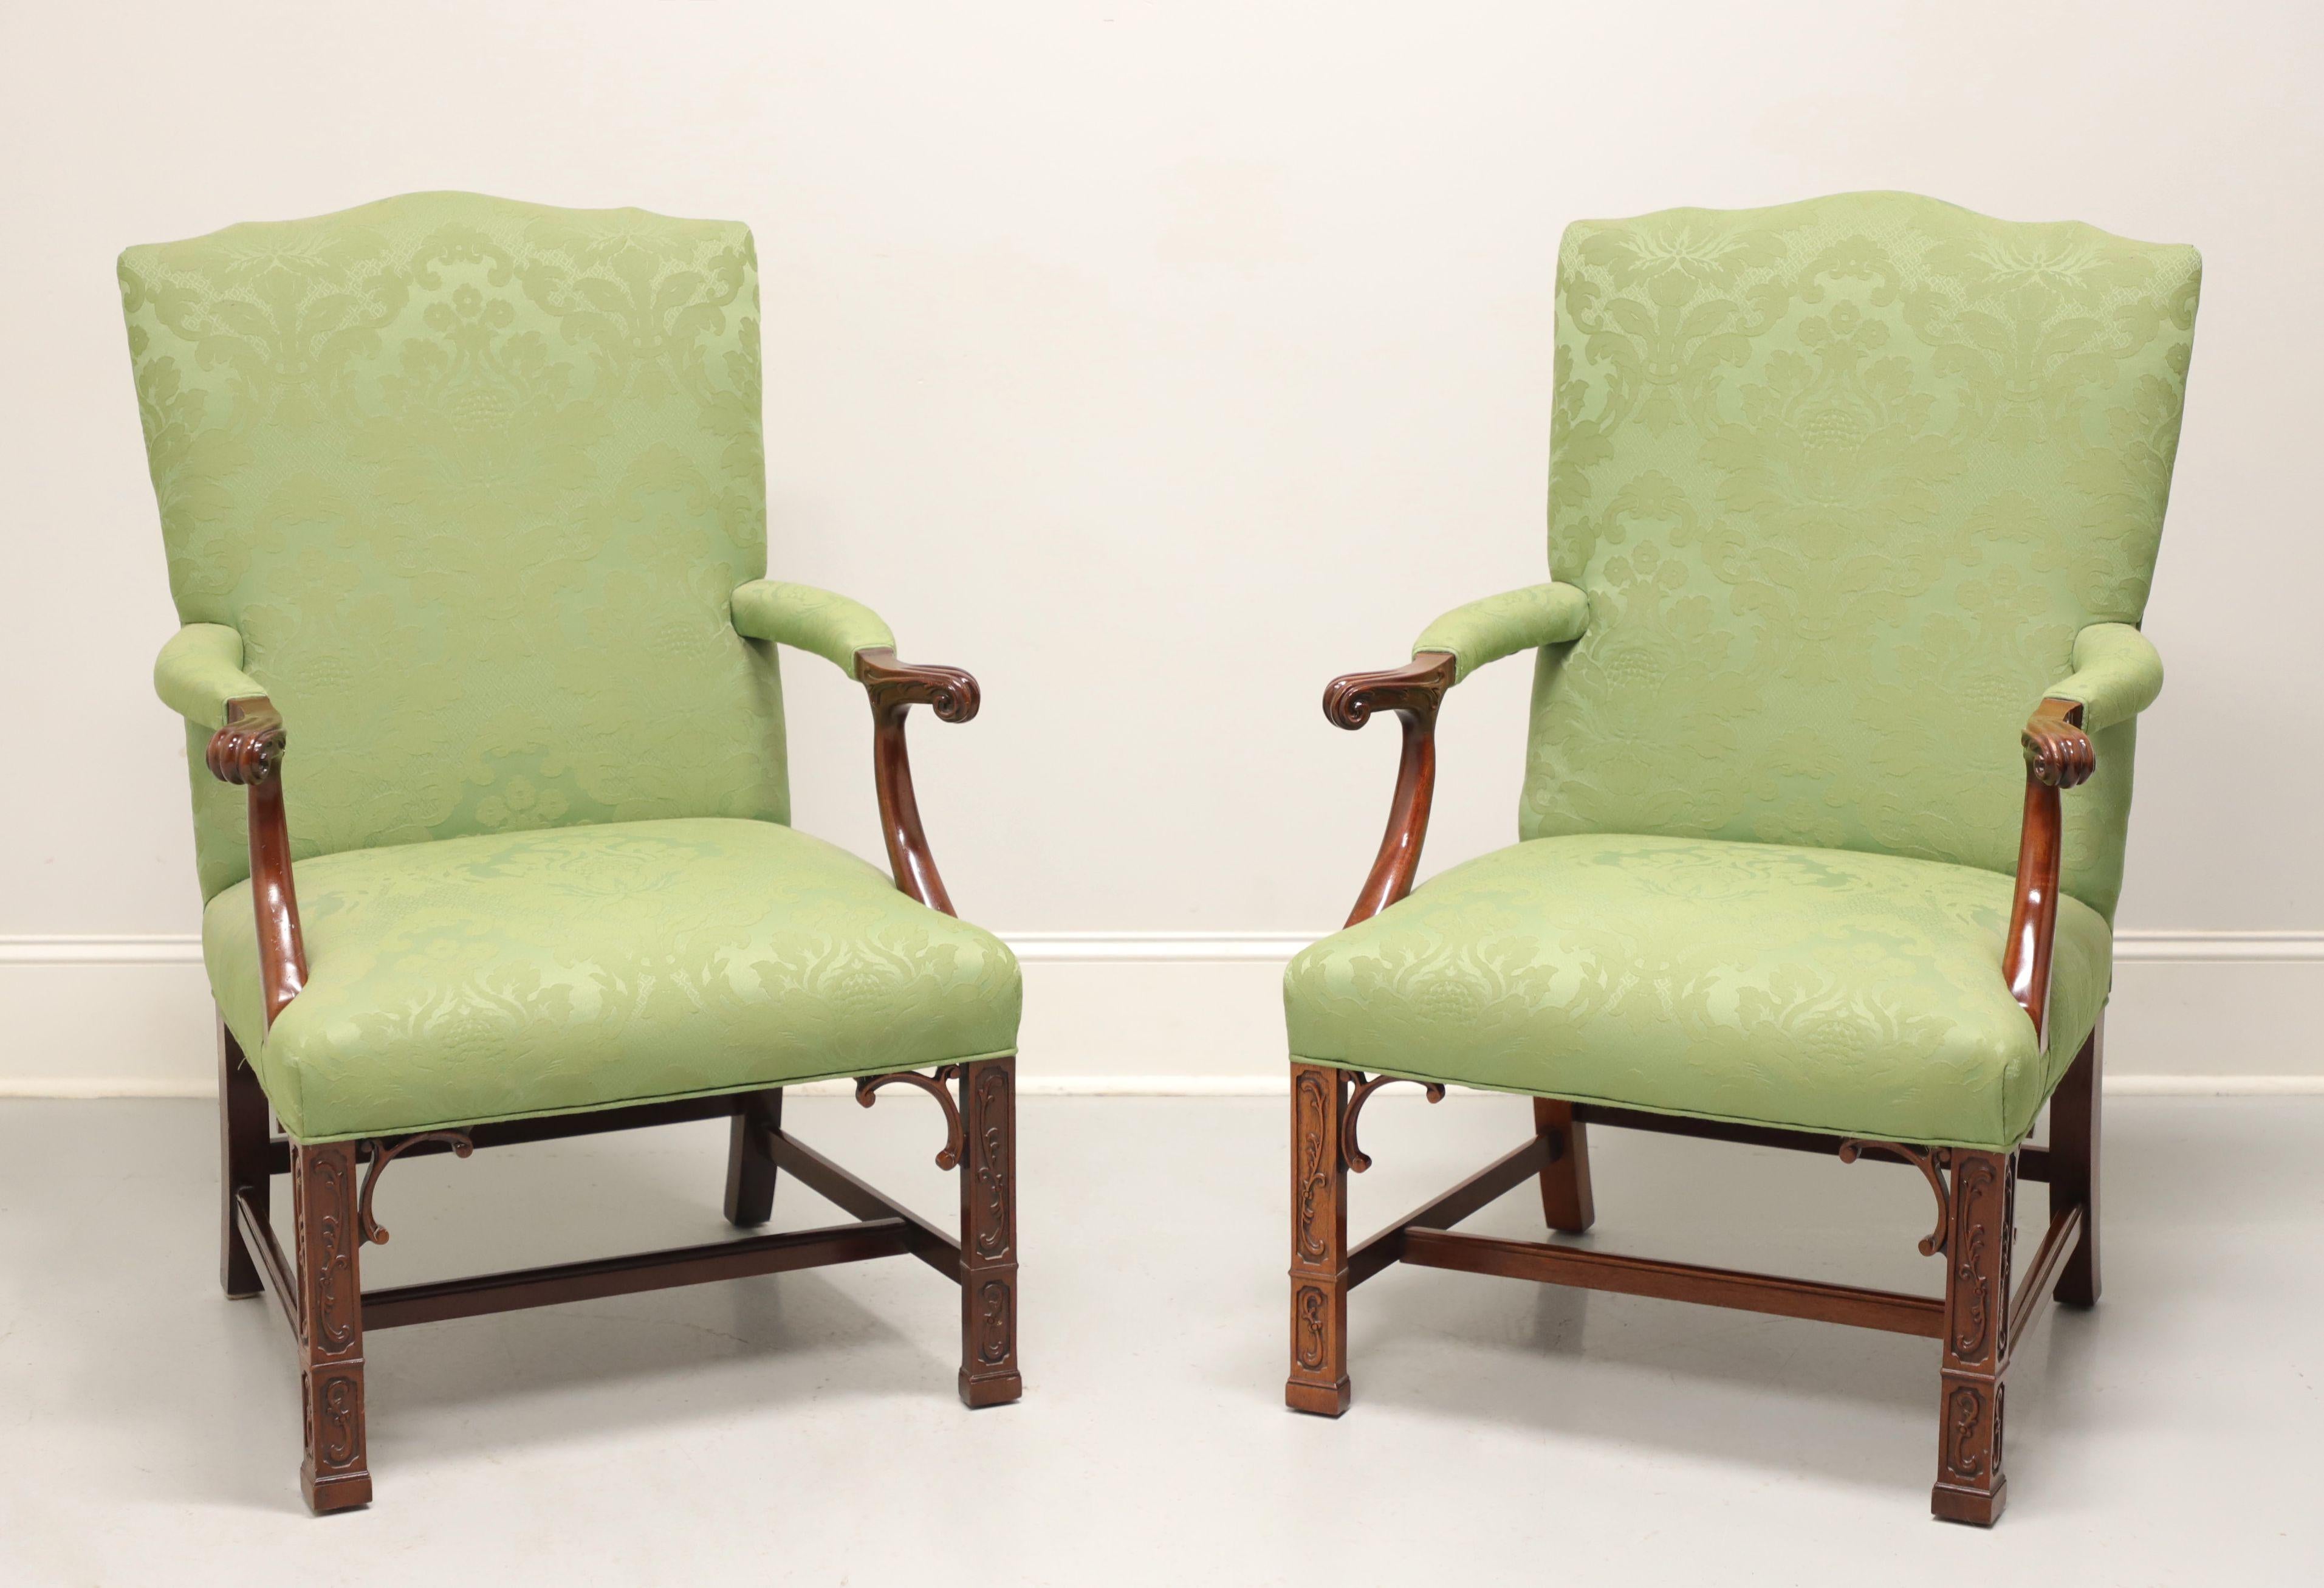 SOUTHWOOD Gainsborough Mahogany Chippendale Style Fretwork Armchairs - Pair For Sale 5